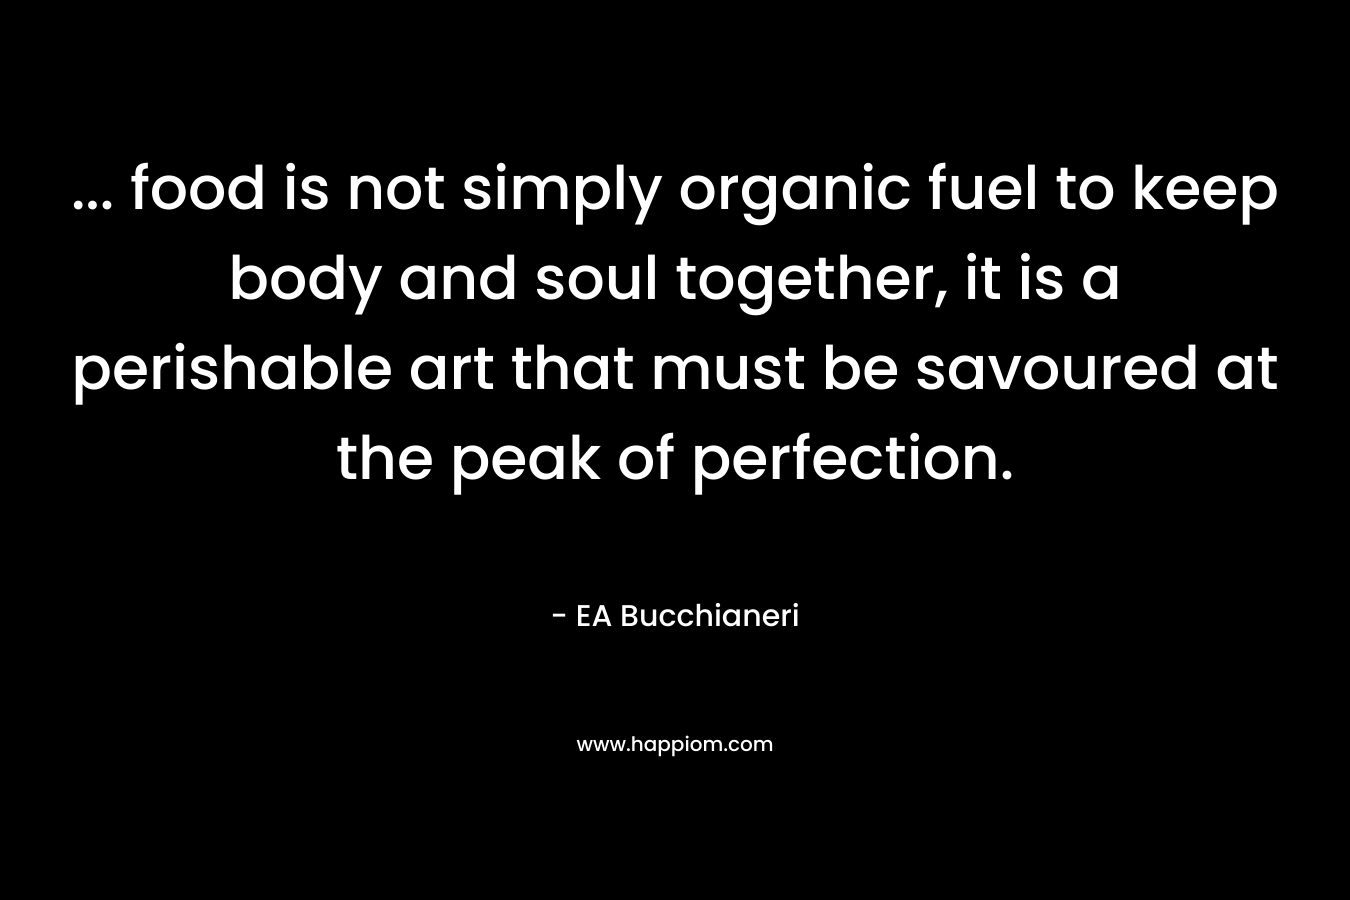 ... food is not simply organic fuel to keep body and soul together, it is a perishable art that must be savoured at the peak of perfection.